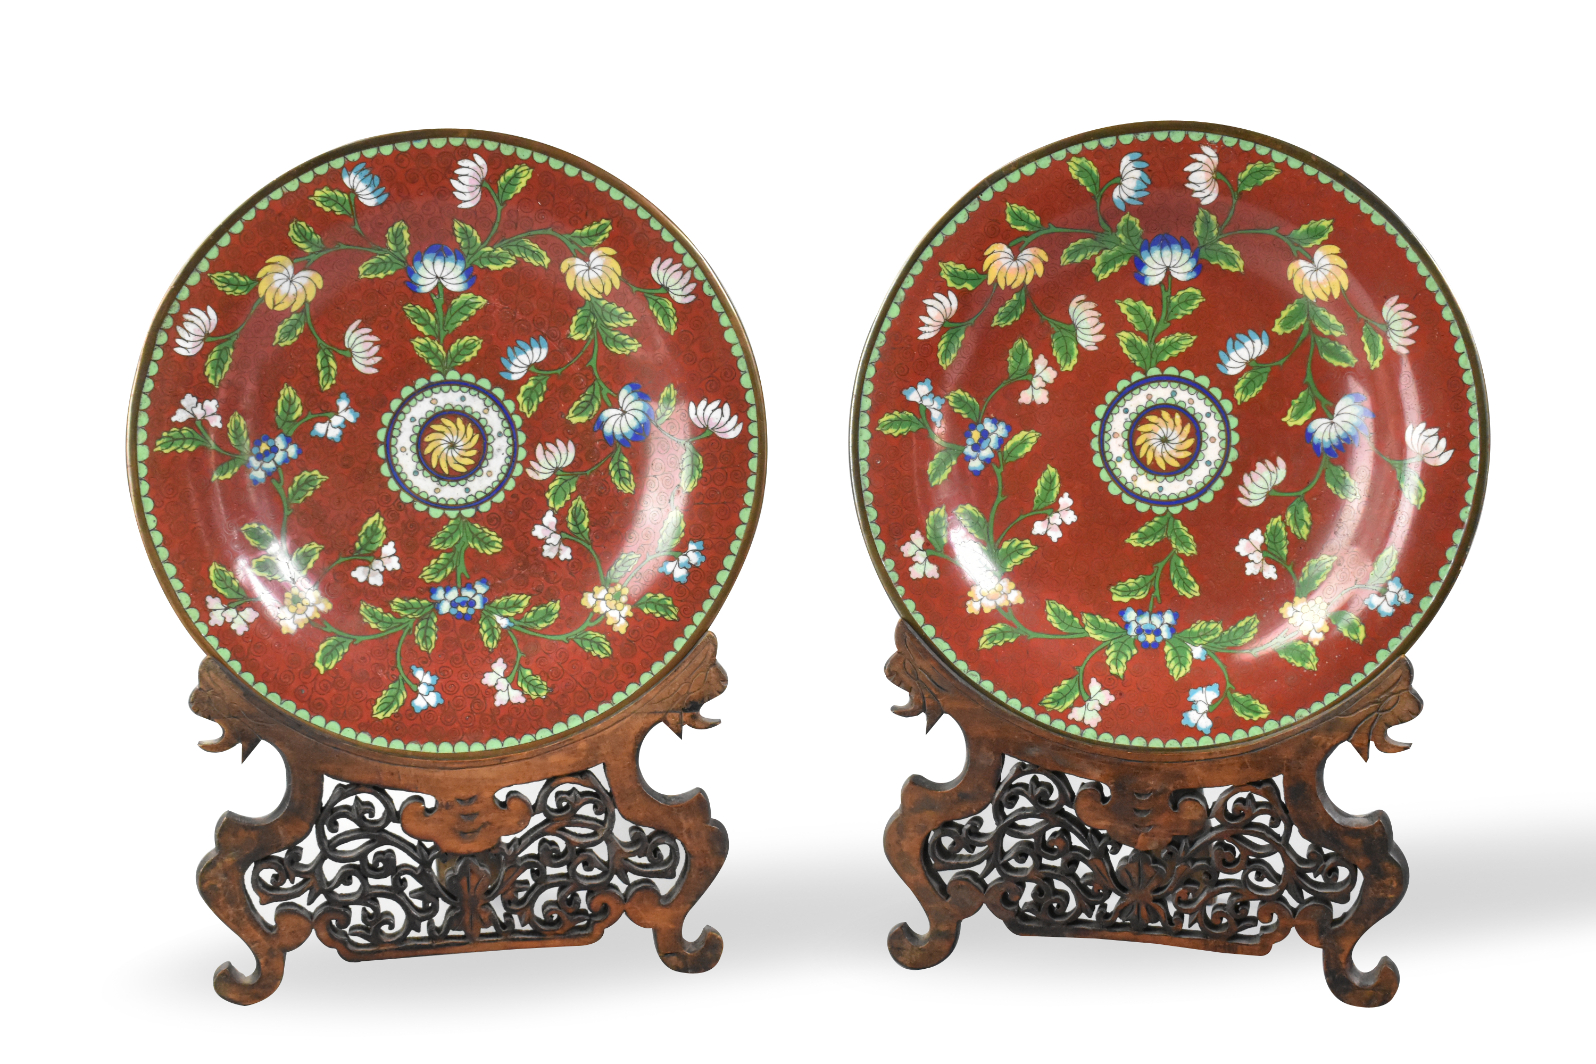 PAIR OF CHINESE CLOISONNE PLATES